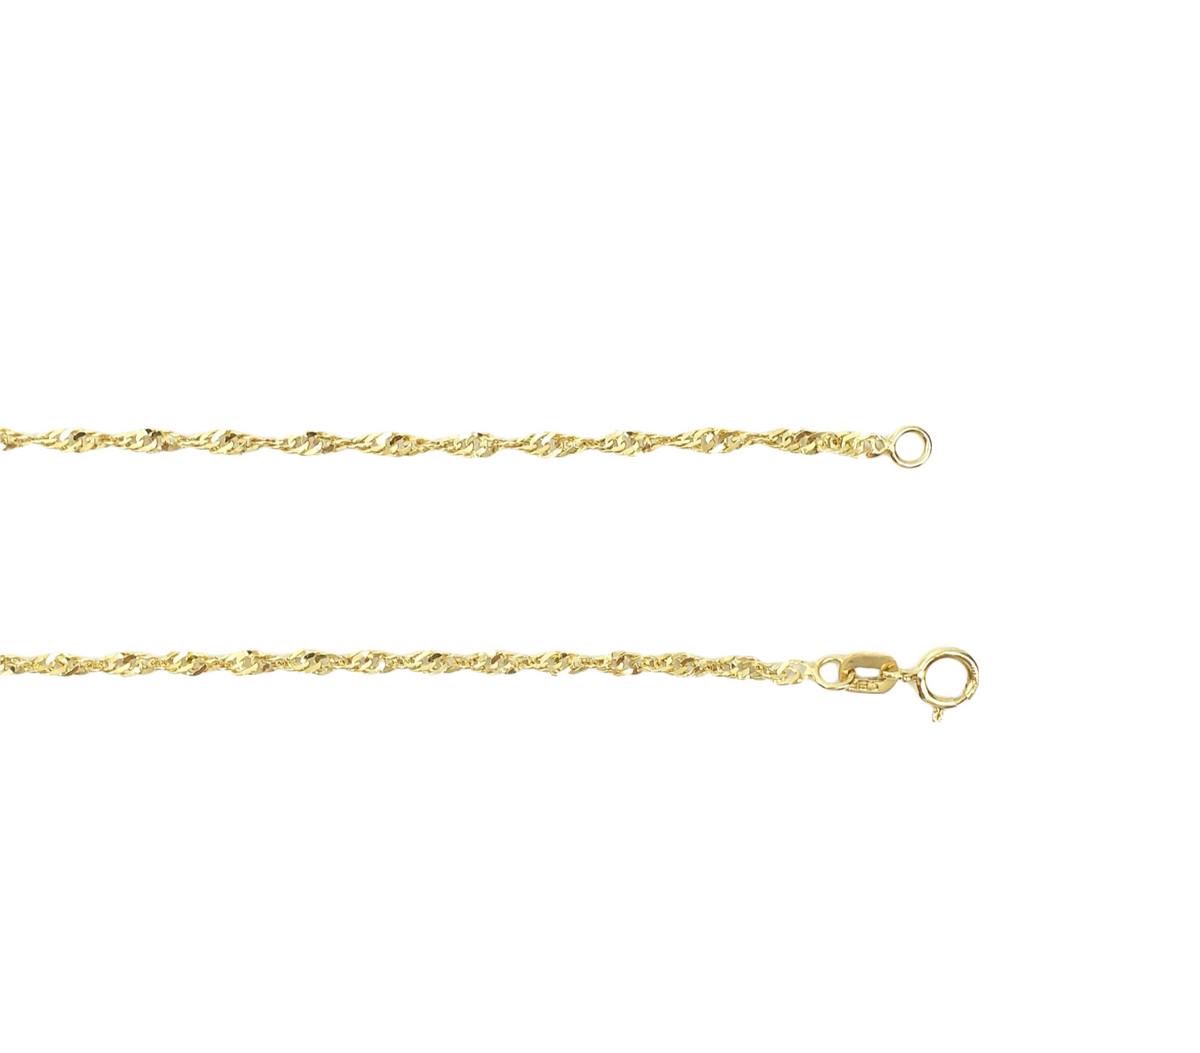 10K Yellow Gold 2mm Singapore Chain with Spring Clasp - 20 Inches